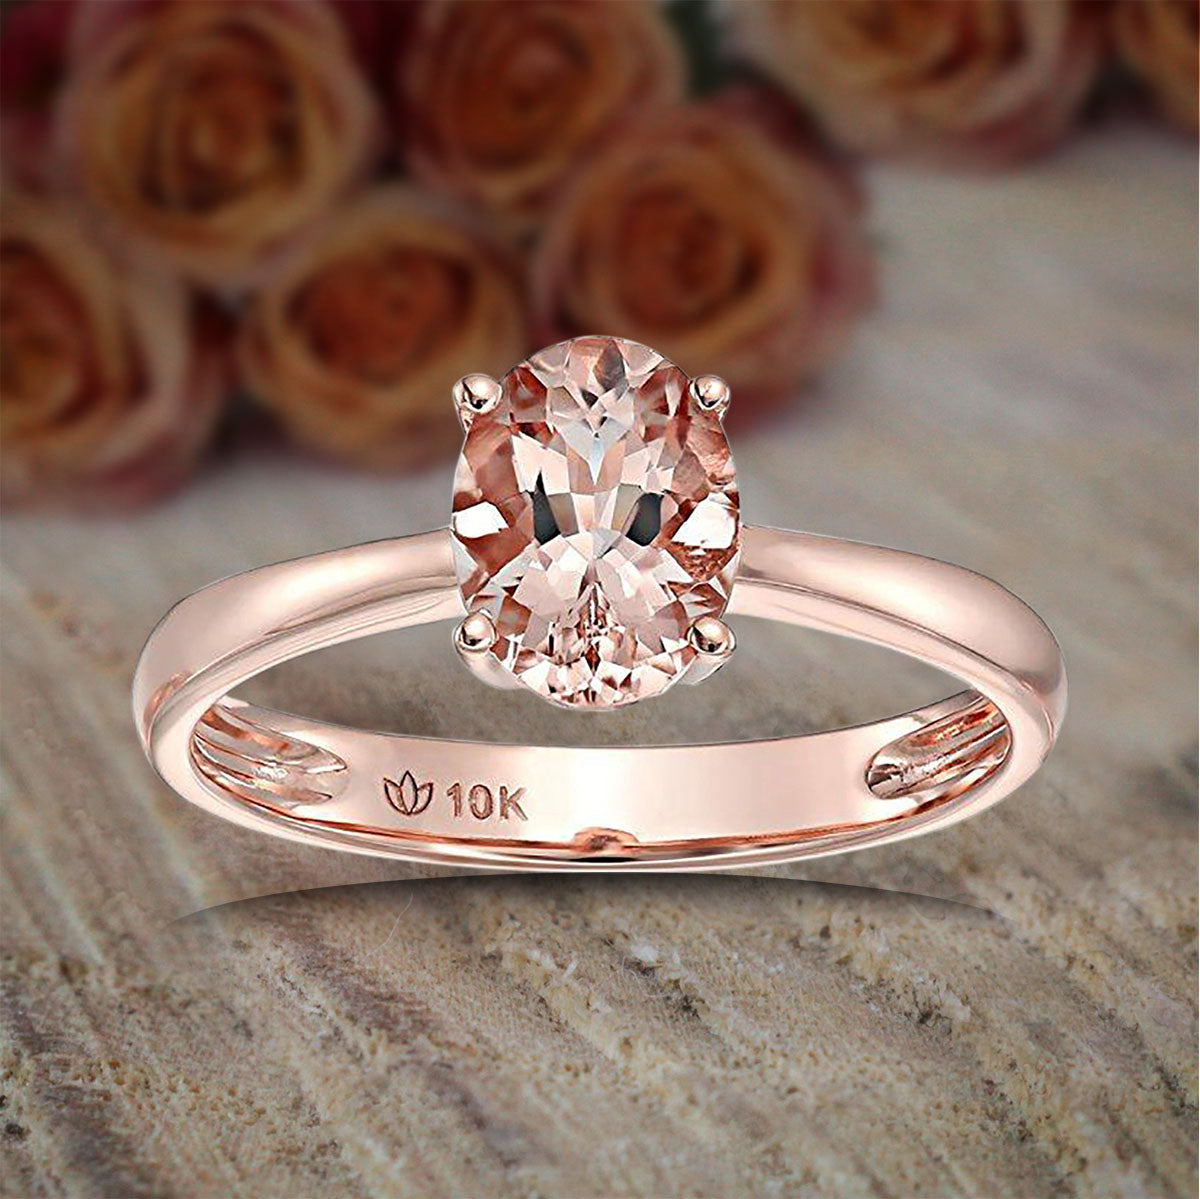 Get the Perfect Pink Diamond Engagement Rings | GLAMIRA.in